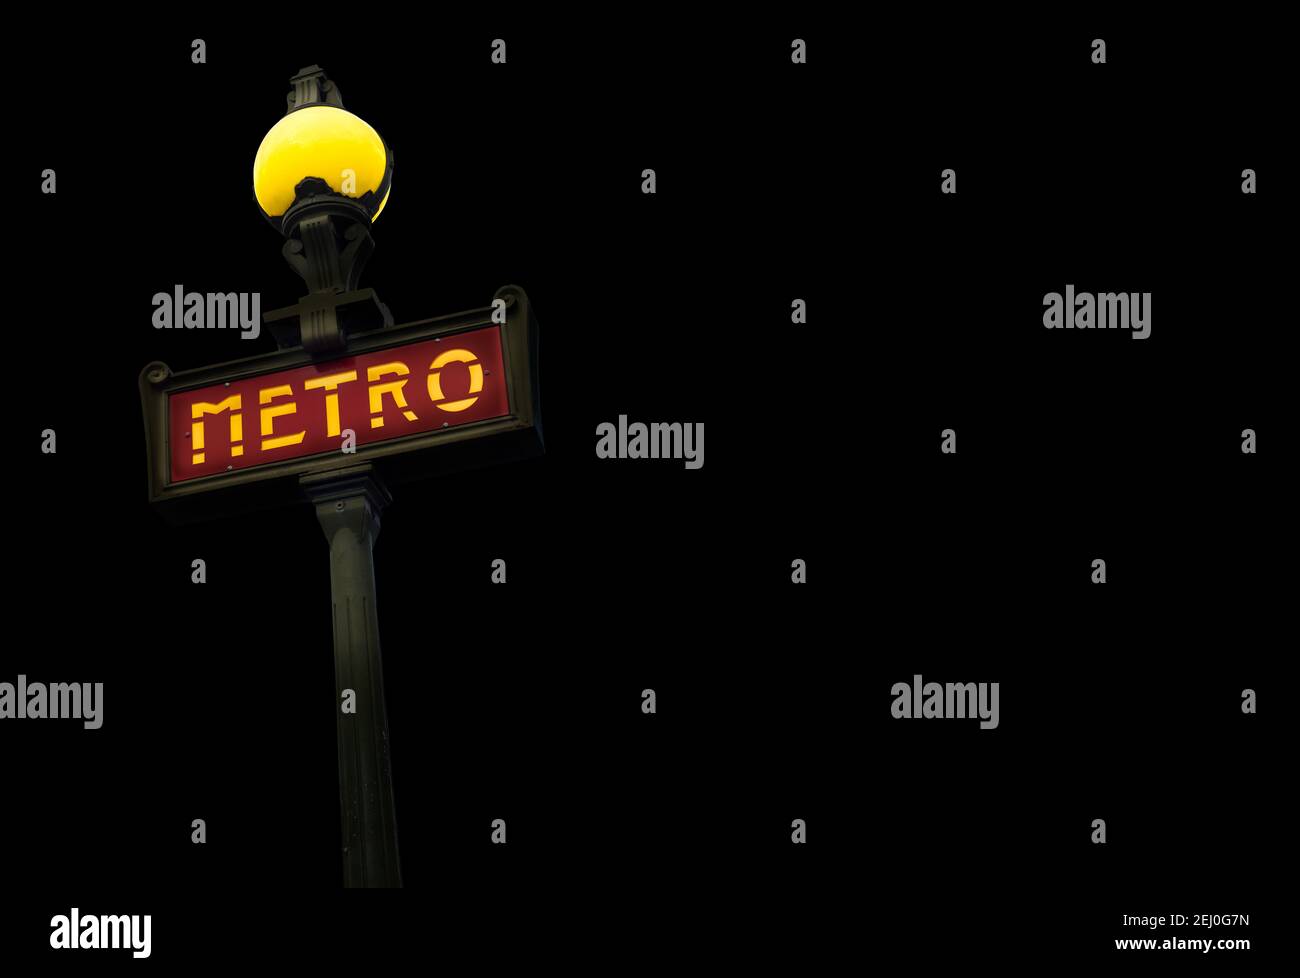 Vintage Metro Sign In France At Night, With Copy Space Stock Photo